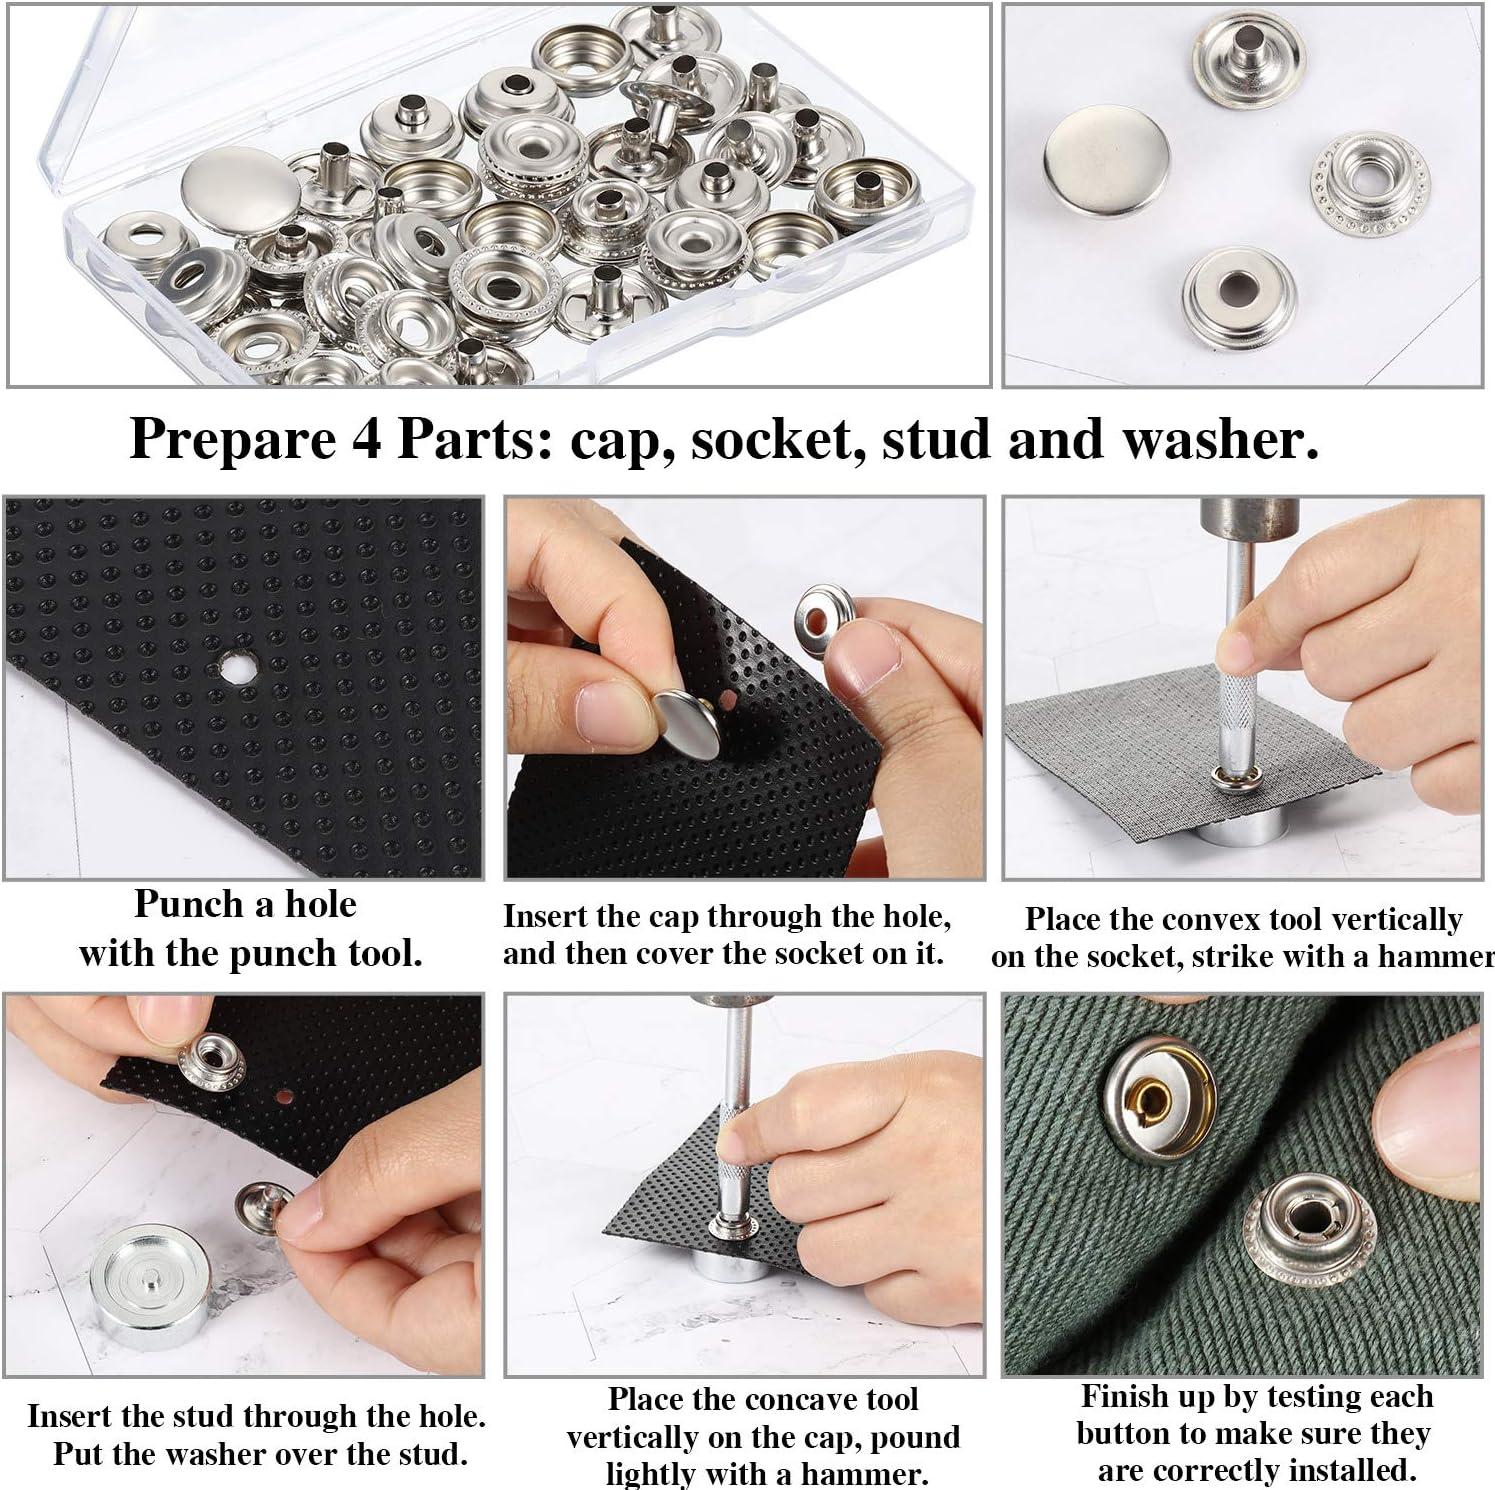 EXCEART 2 Sets Metal Buttons Snaps for Sewing Down Jacket Repair Kit Metal  Snap Fasteners Snap Fasteners Kit Clothes Snap Fasteners Decorating Tools